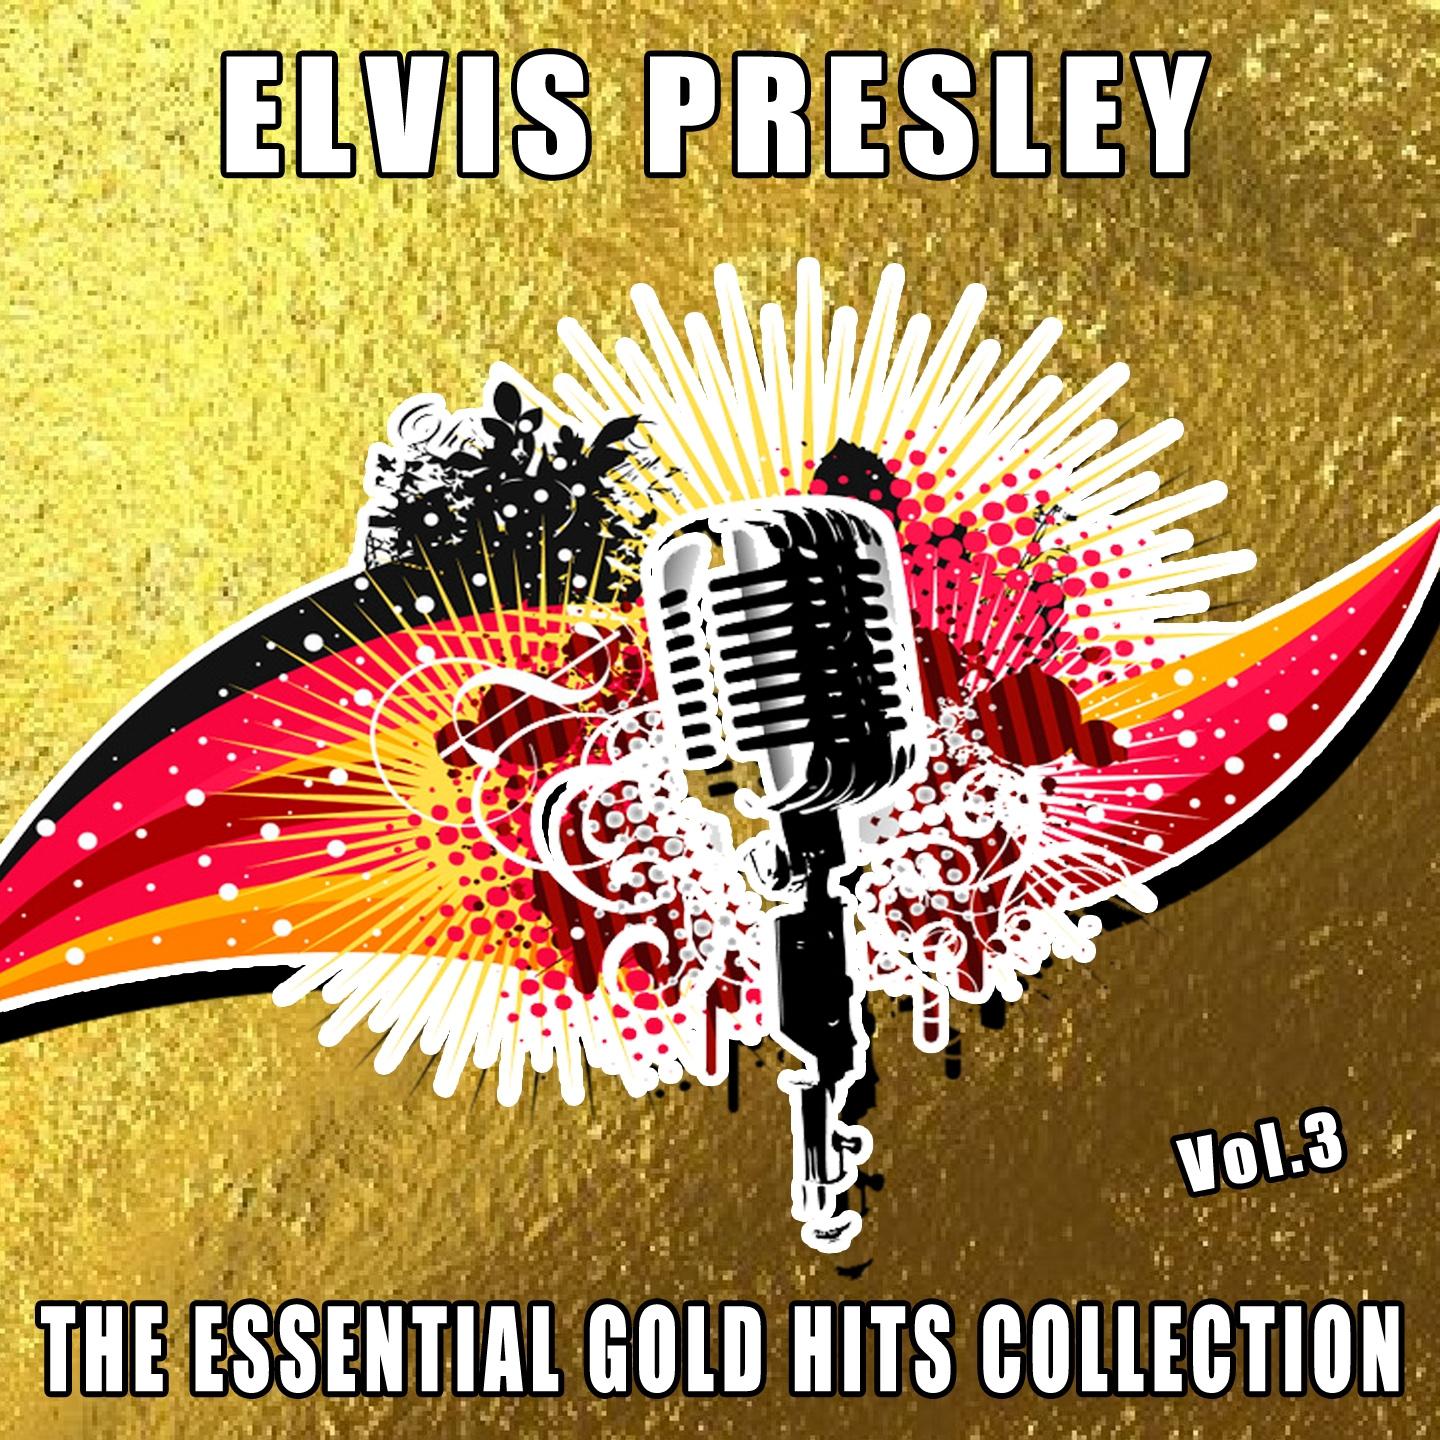 The Essential Gold Hits Collection, Vol.3